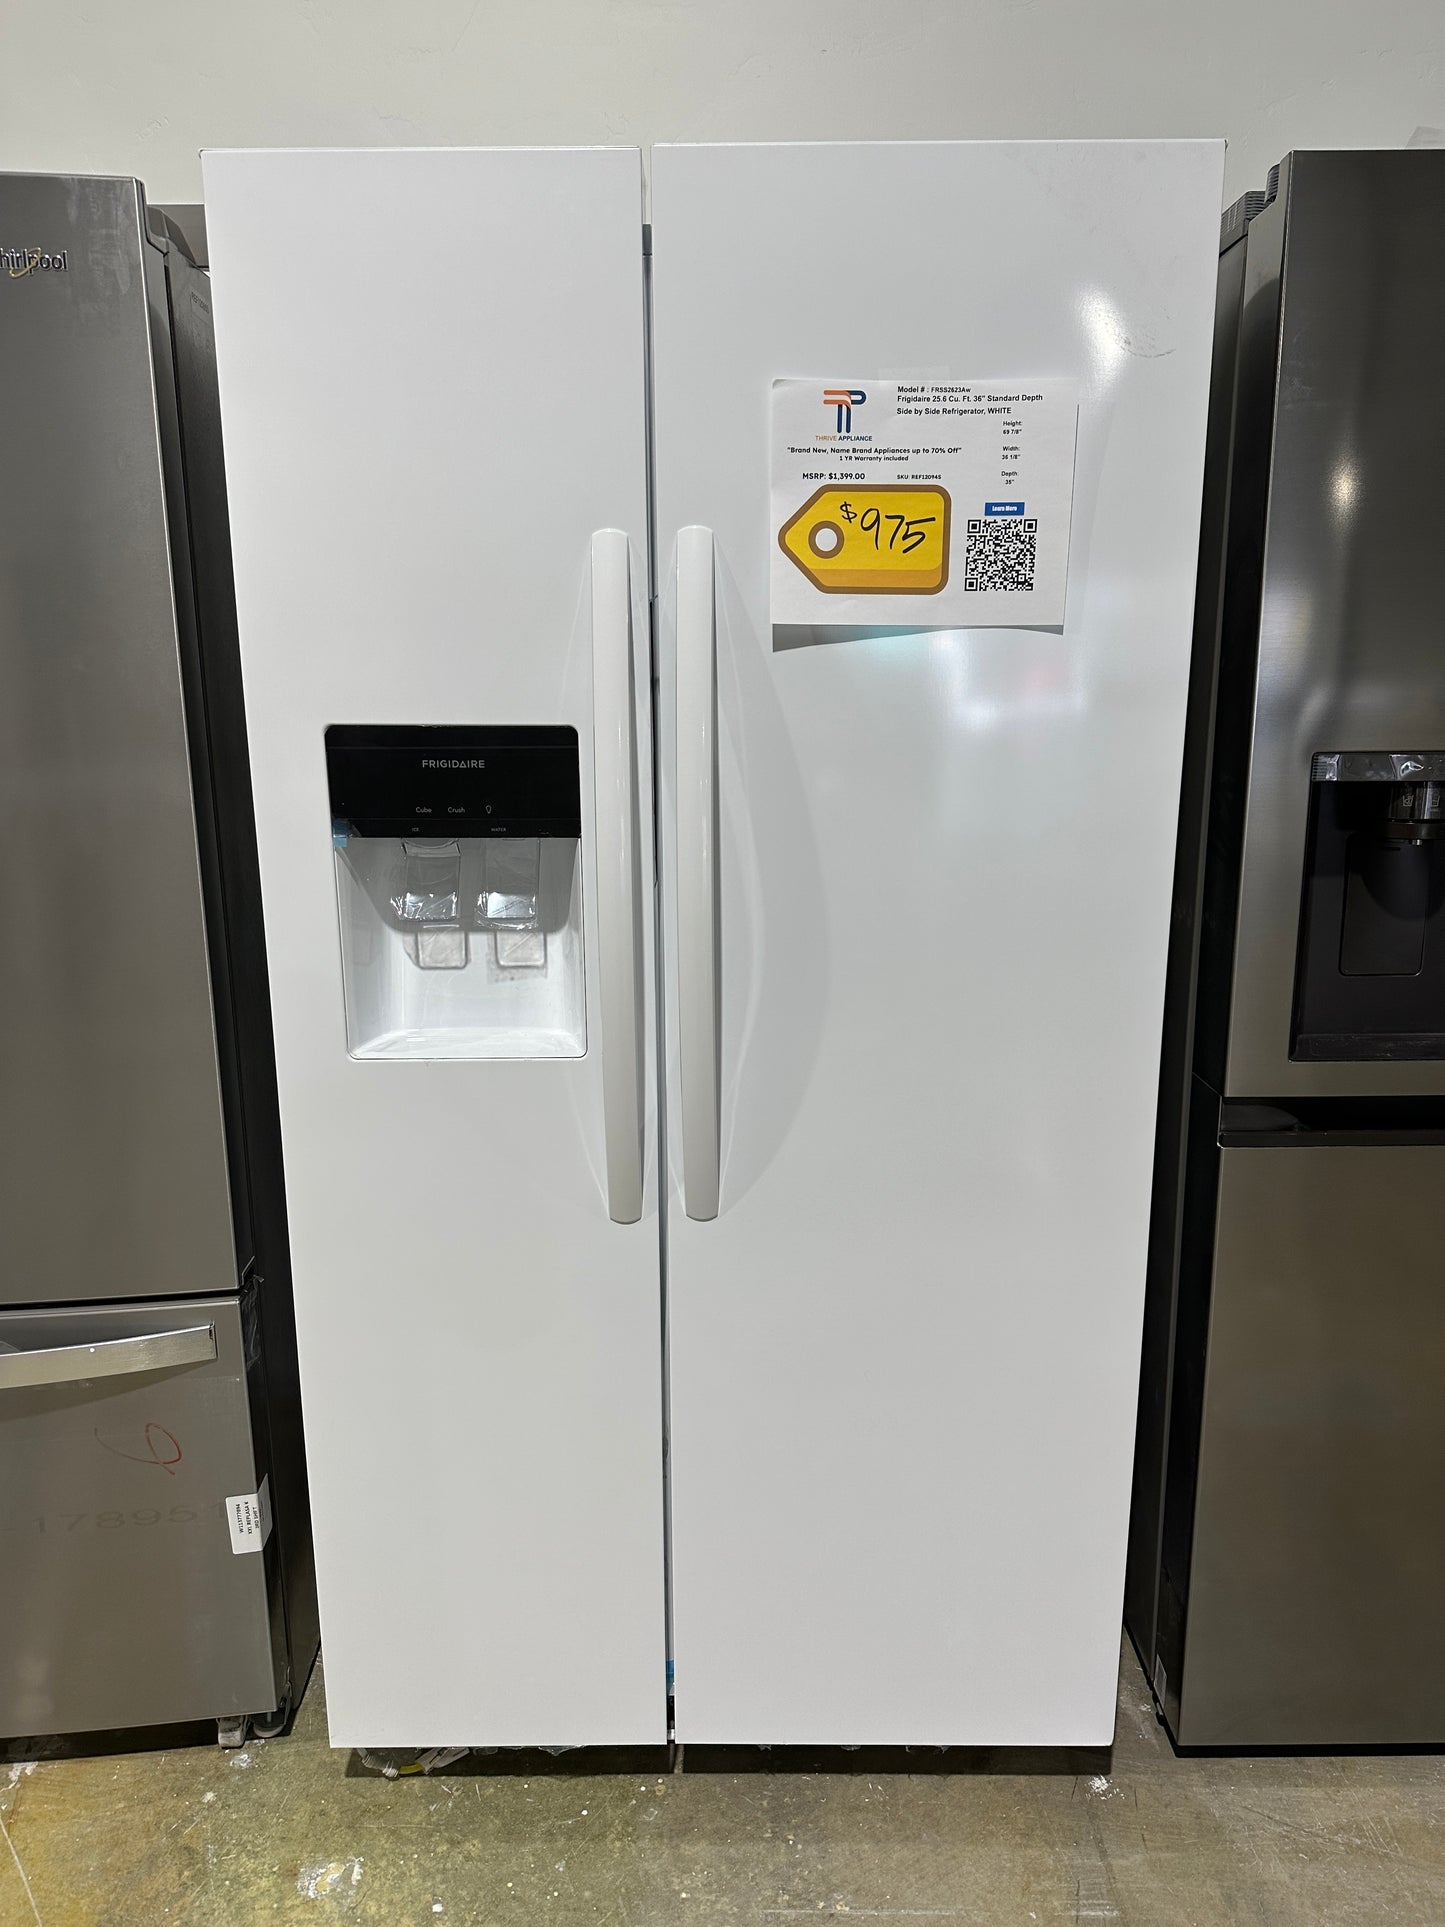 Frigidaire - 25.6 Cu. Ft. Side-by-Side Refrigerator - White  Model:FRSS2623AW  REF12094S